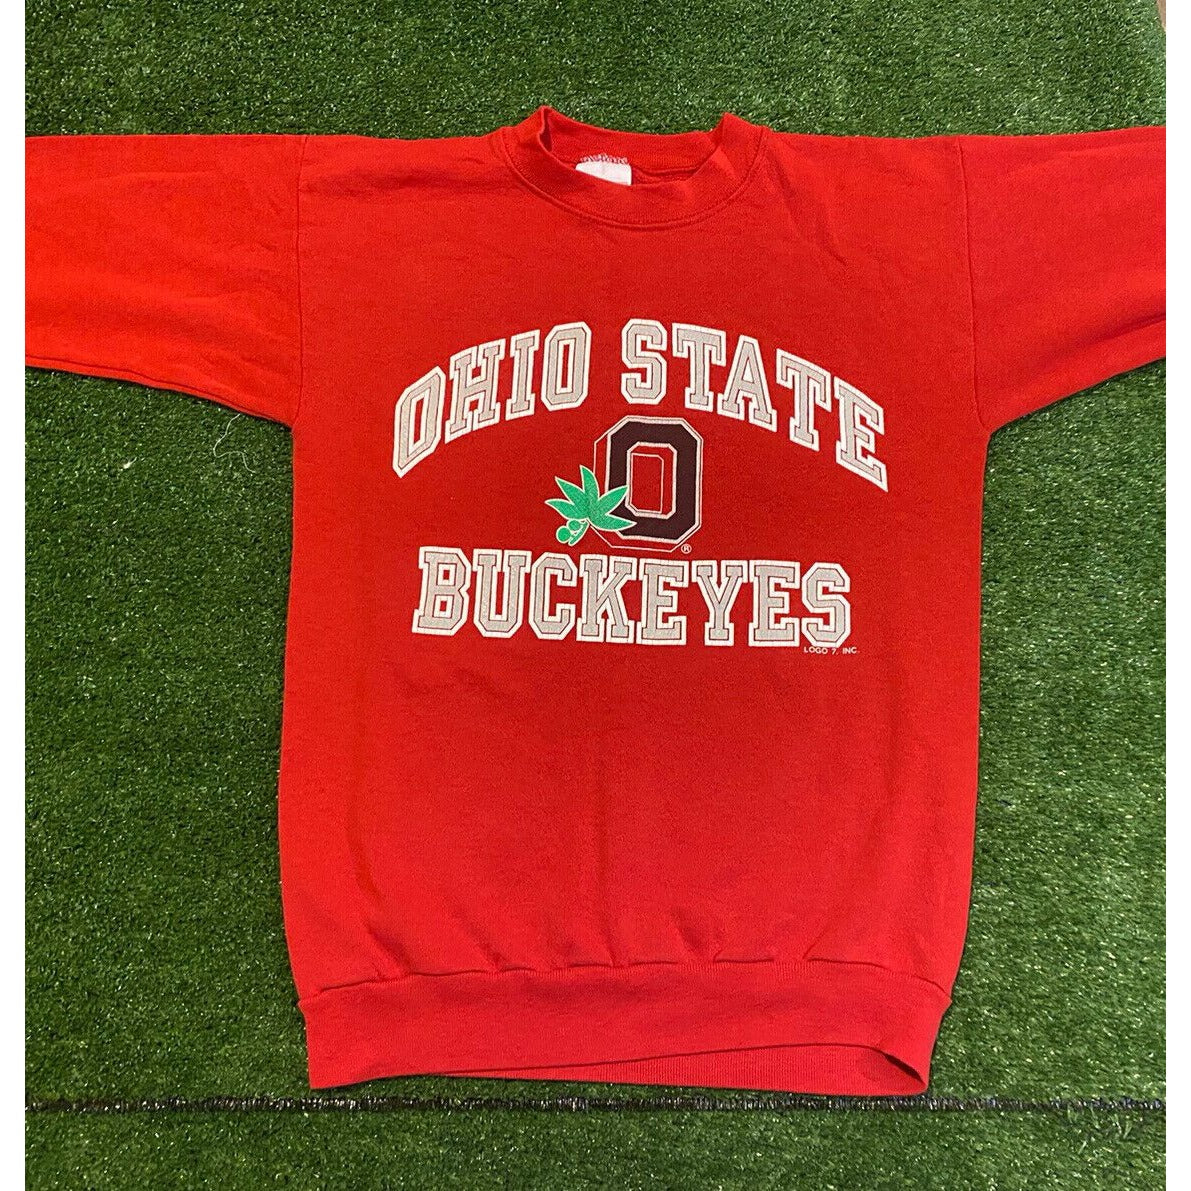 Vintage Tultex Ohio State Buckeyes are spell out crewneck sweatshirt small red